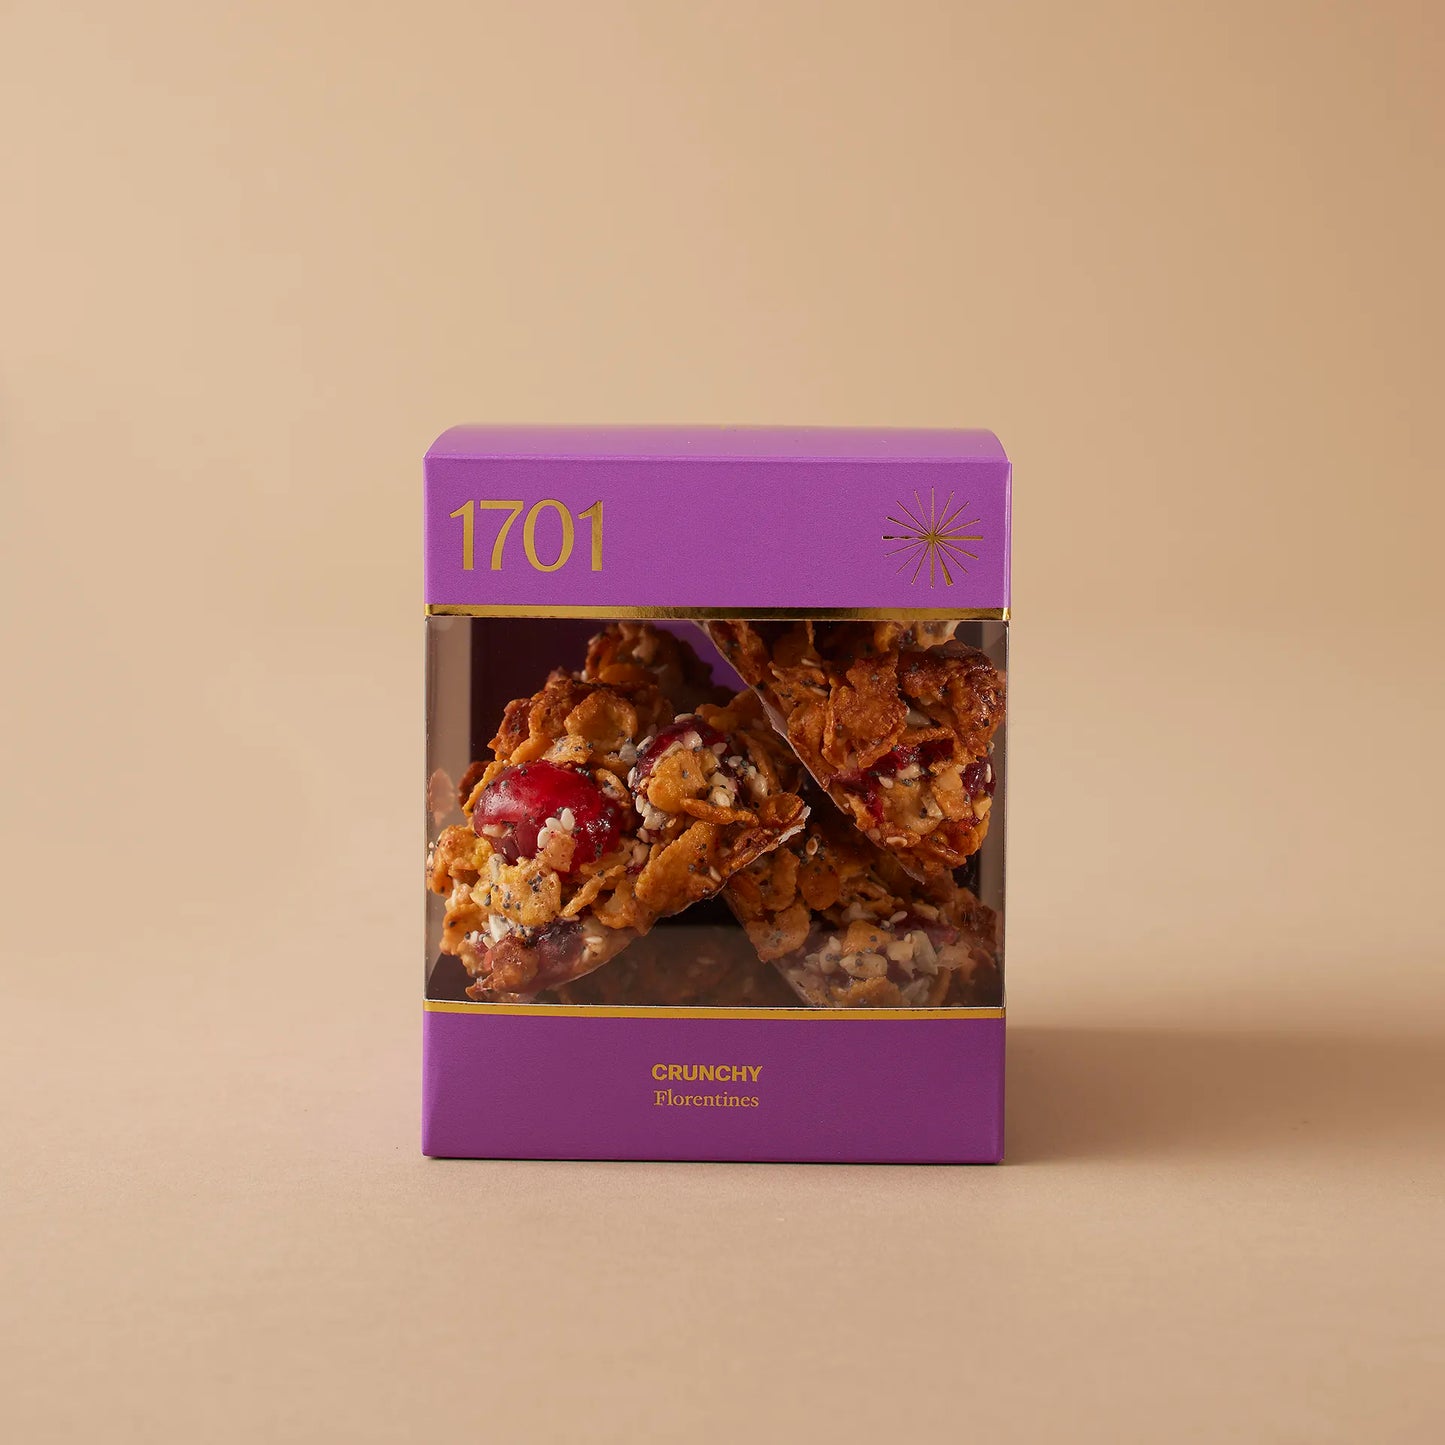 The Crunchy Florentines Box (200g) is presented on a warm background. The boxfeatures a purple and gold design. It contains 200g of handmade biscuits that are SANHA Halaal approved, including crunchy florentine bicuits. This box of delicious biscuits is the perfect thoughtful gift for someone close to you or a great opportunity to spoil yourself and your family.